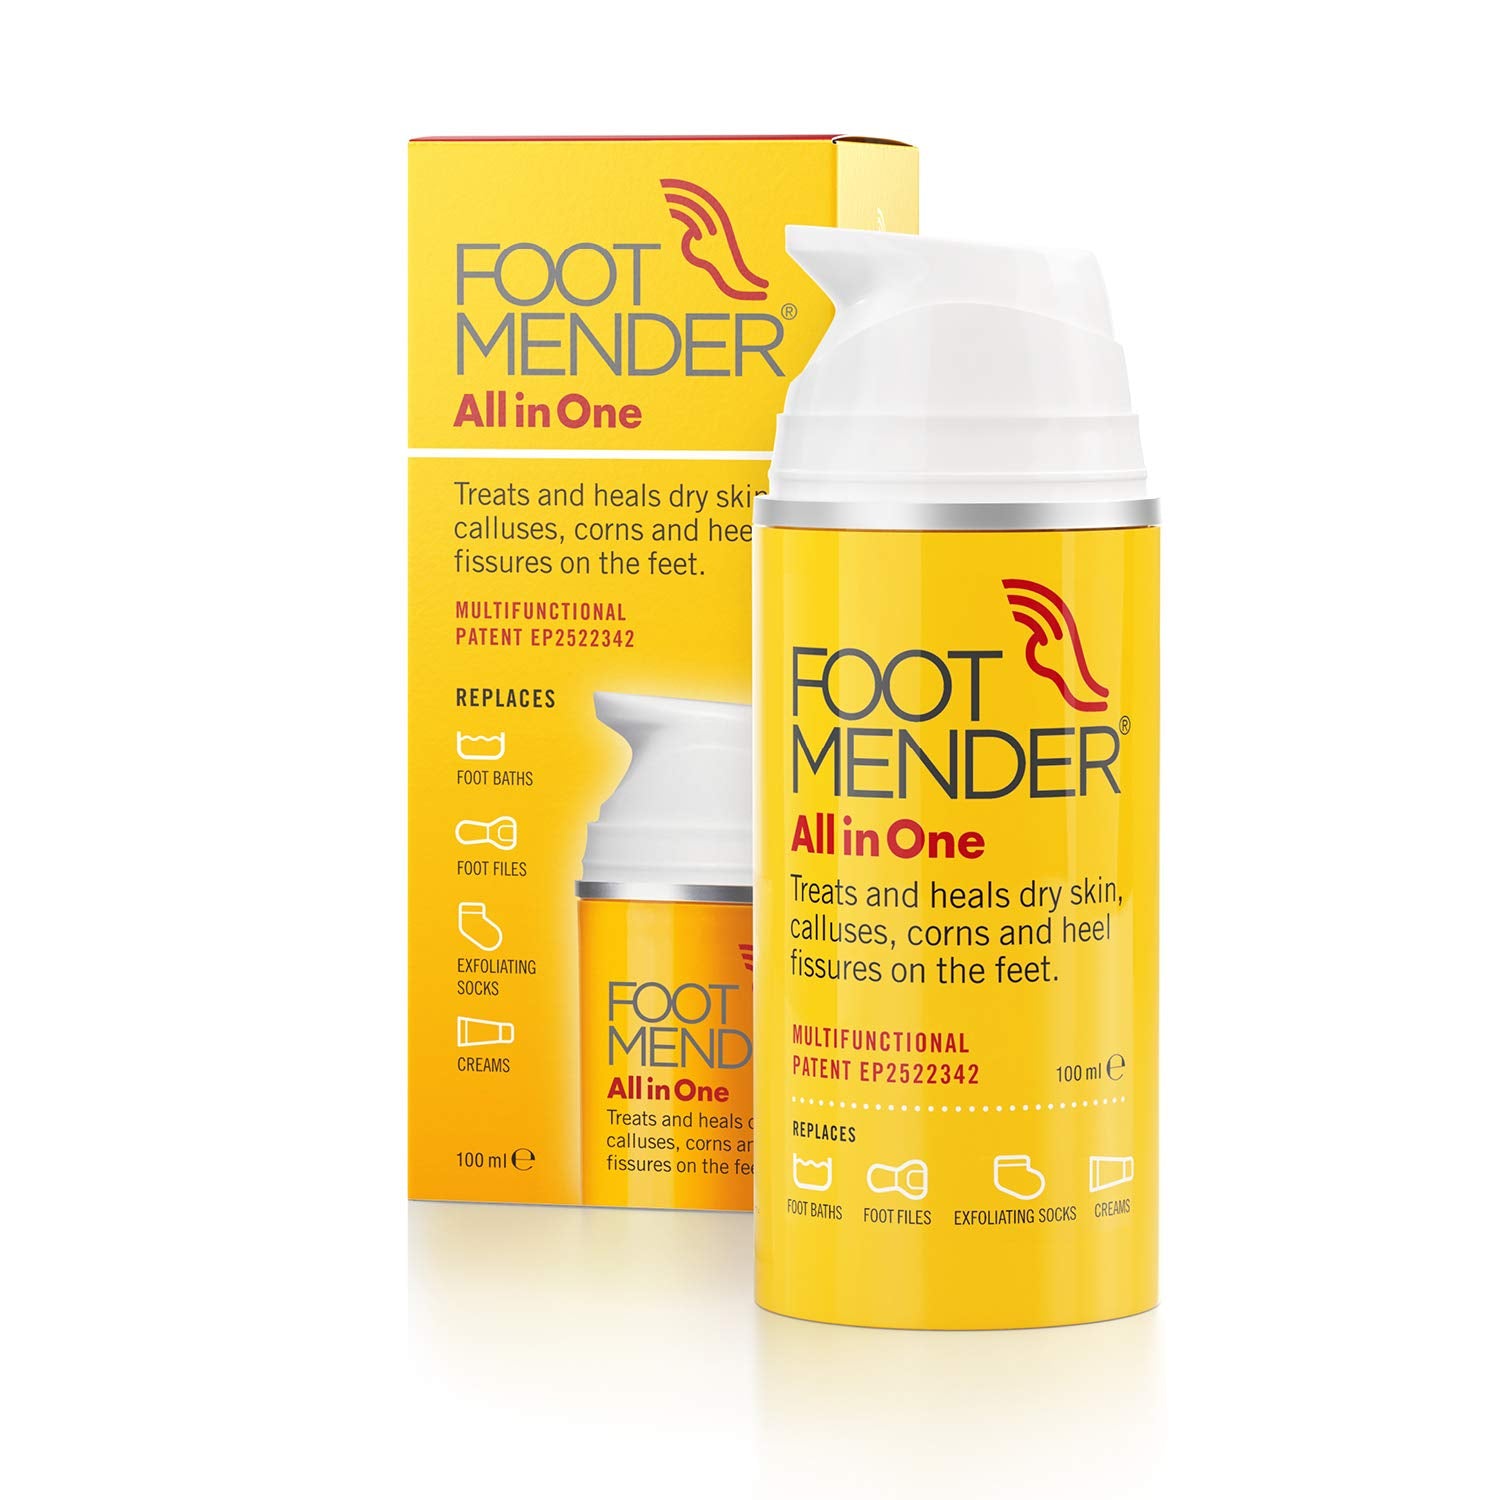 Footmender All in One | Treats and Heals Dry Feet, Hard Skin (calluses), Corns and Cracked Heels (Heel fissures) | Significant Effect After First Treatment | 100ml